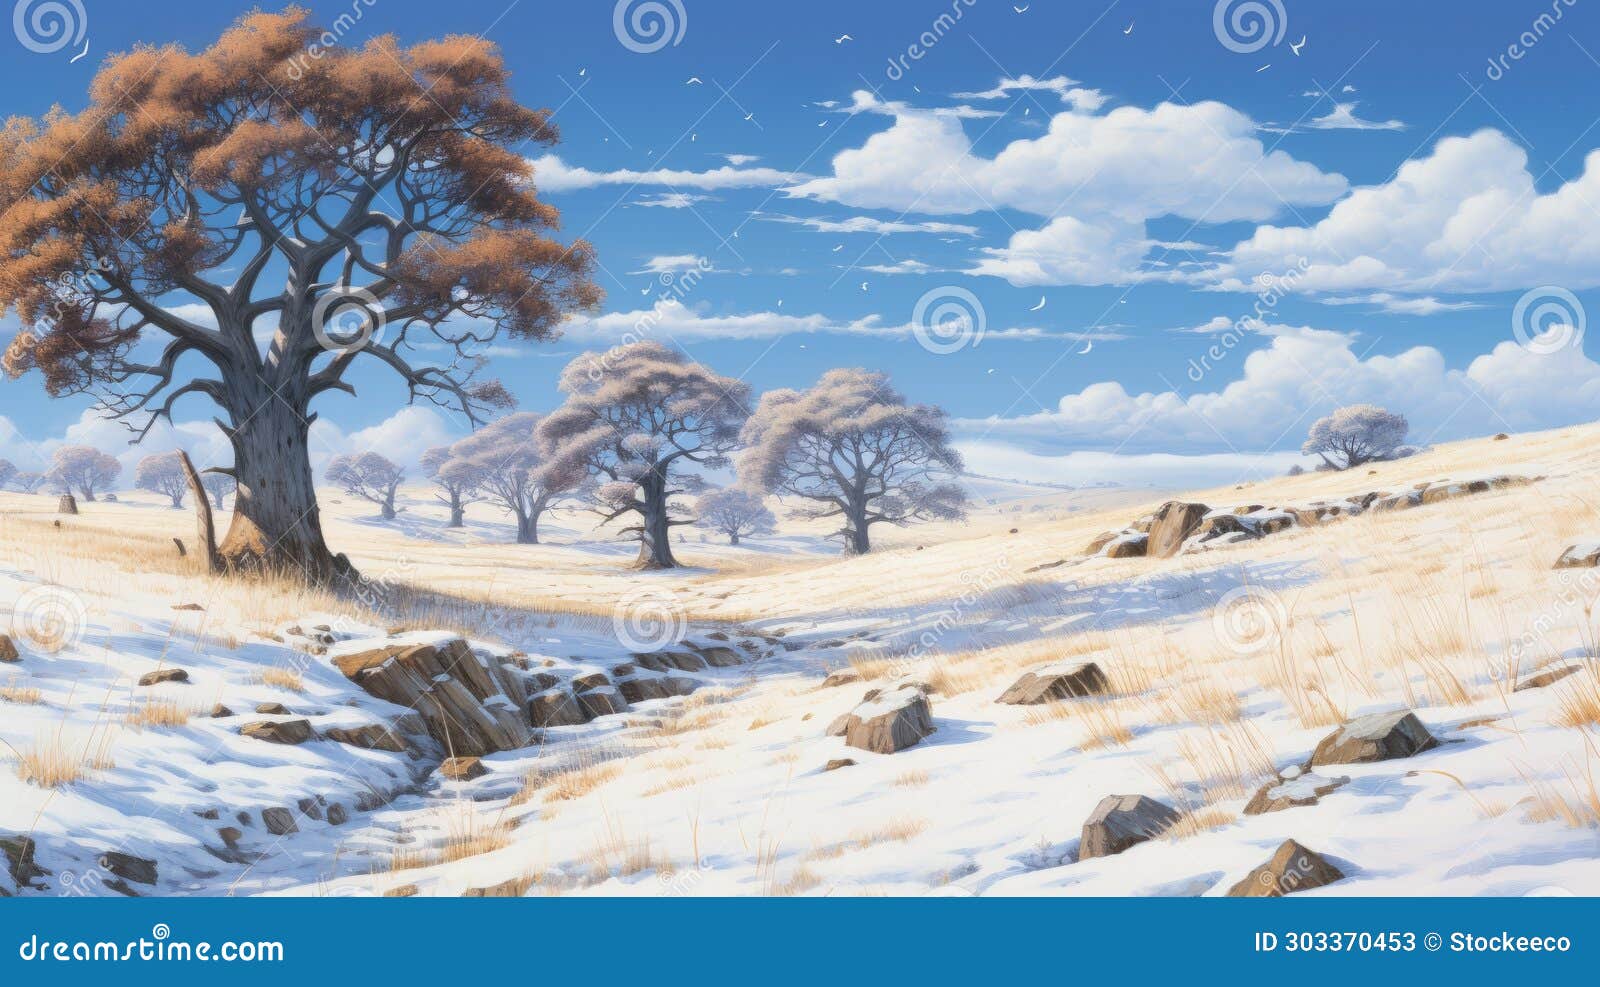 snowy landscape painting in the style of greg hildebrandt